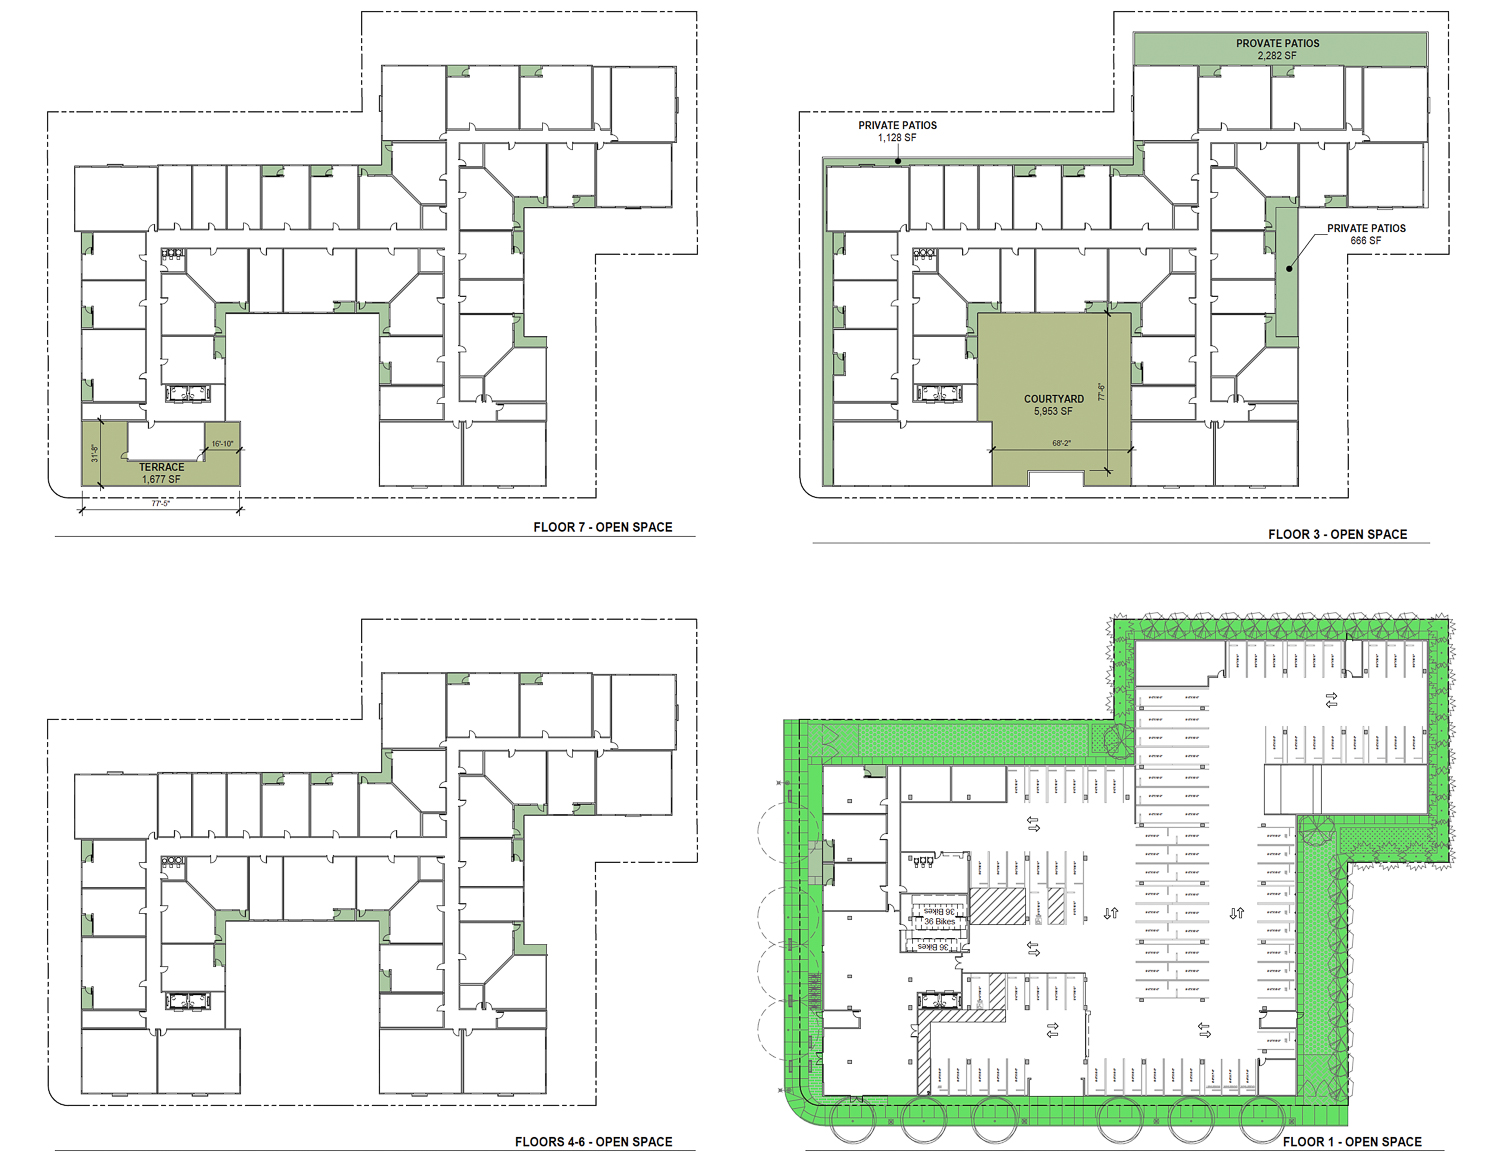 3781 El Camino Real floor plans, illustration by BDE Architecture